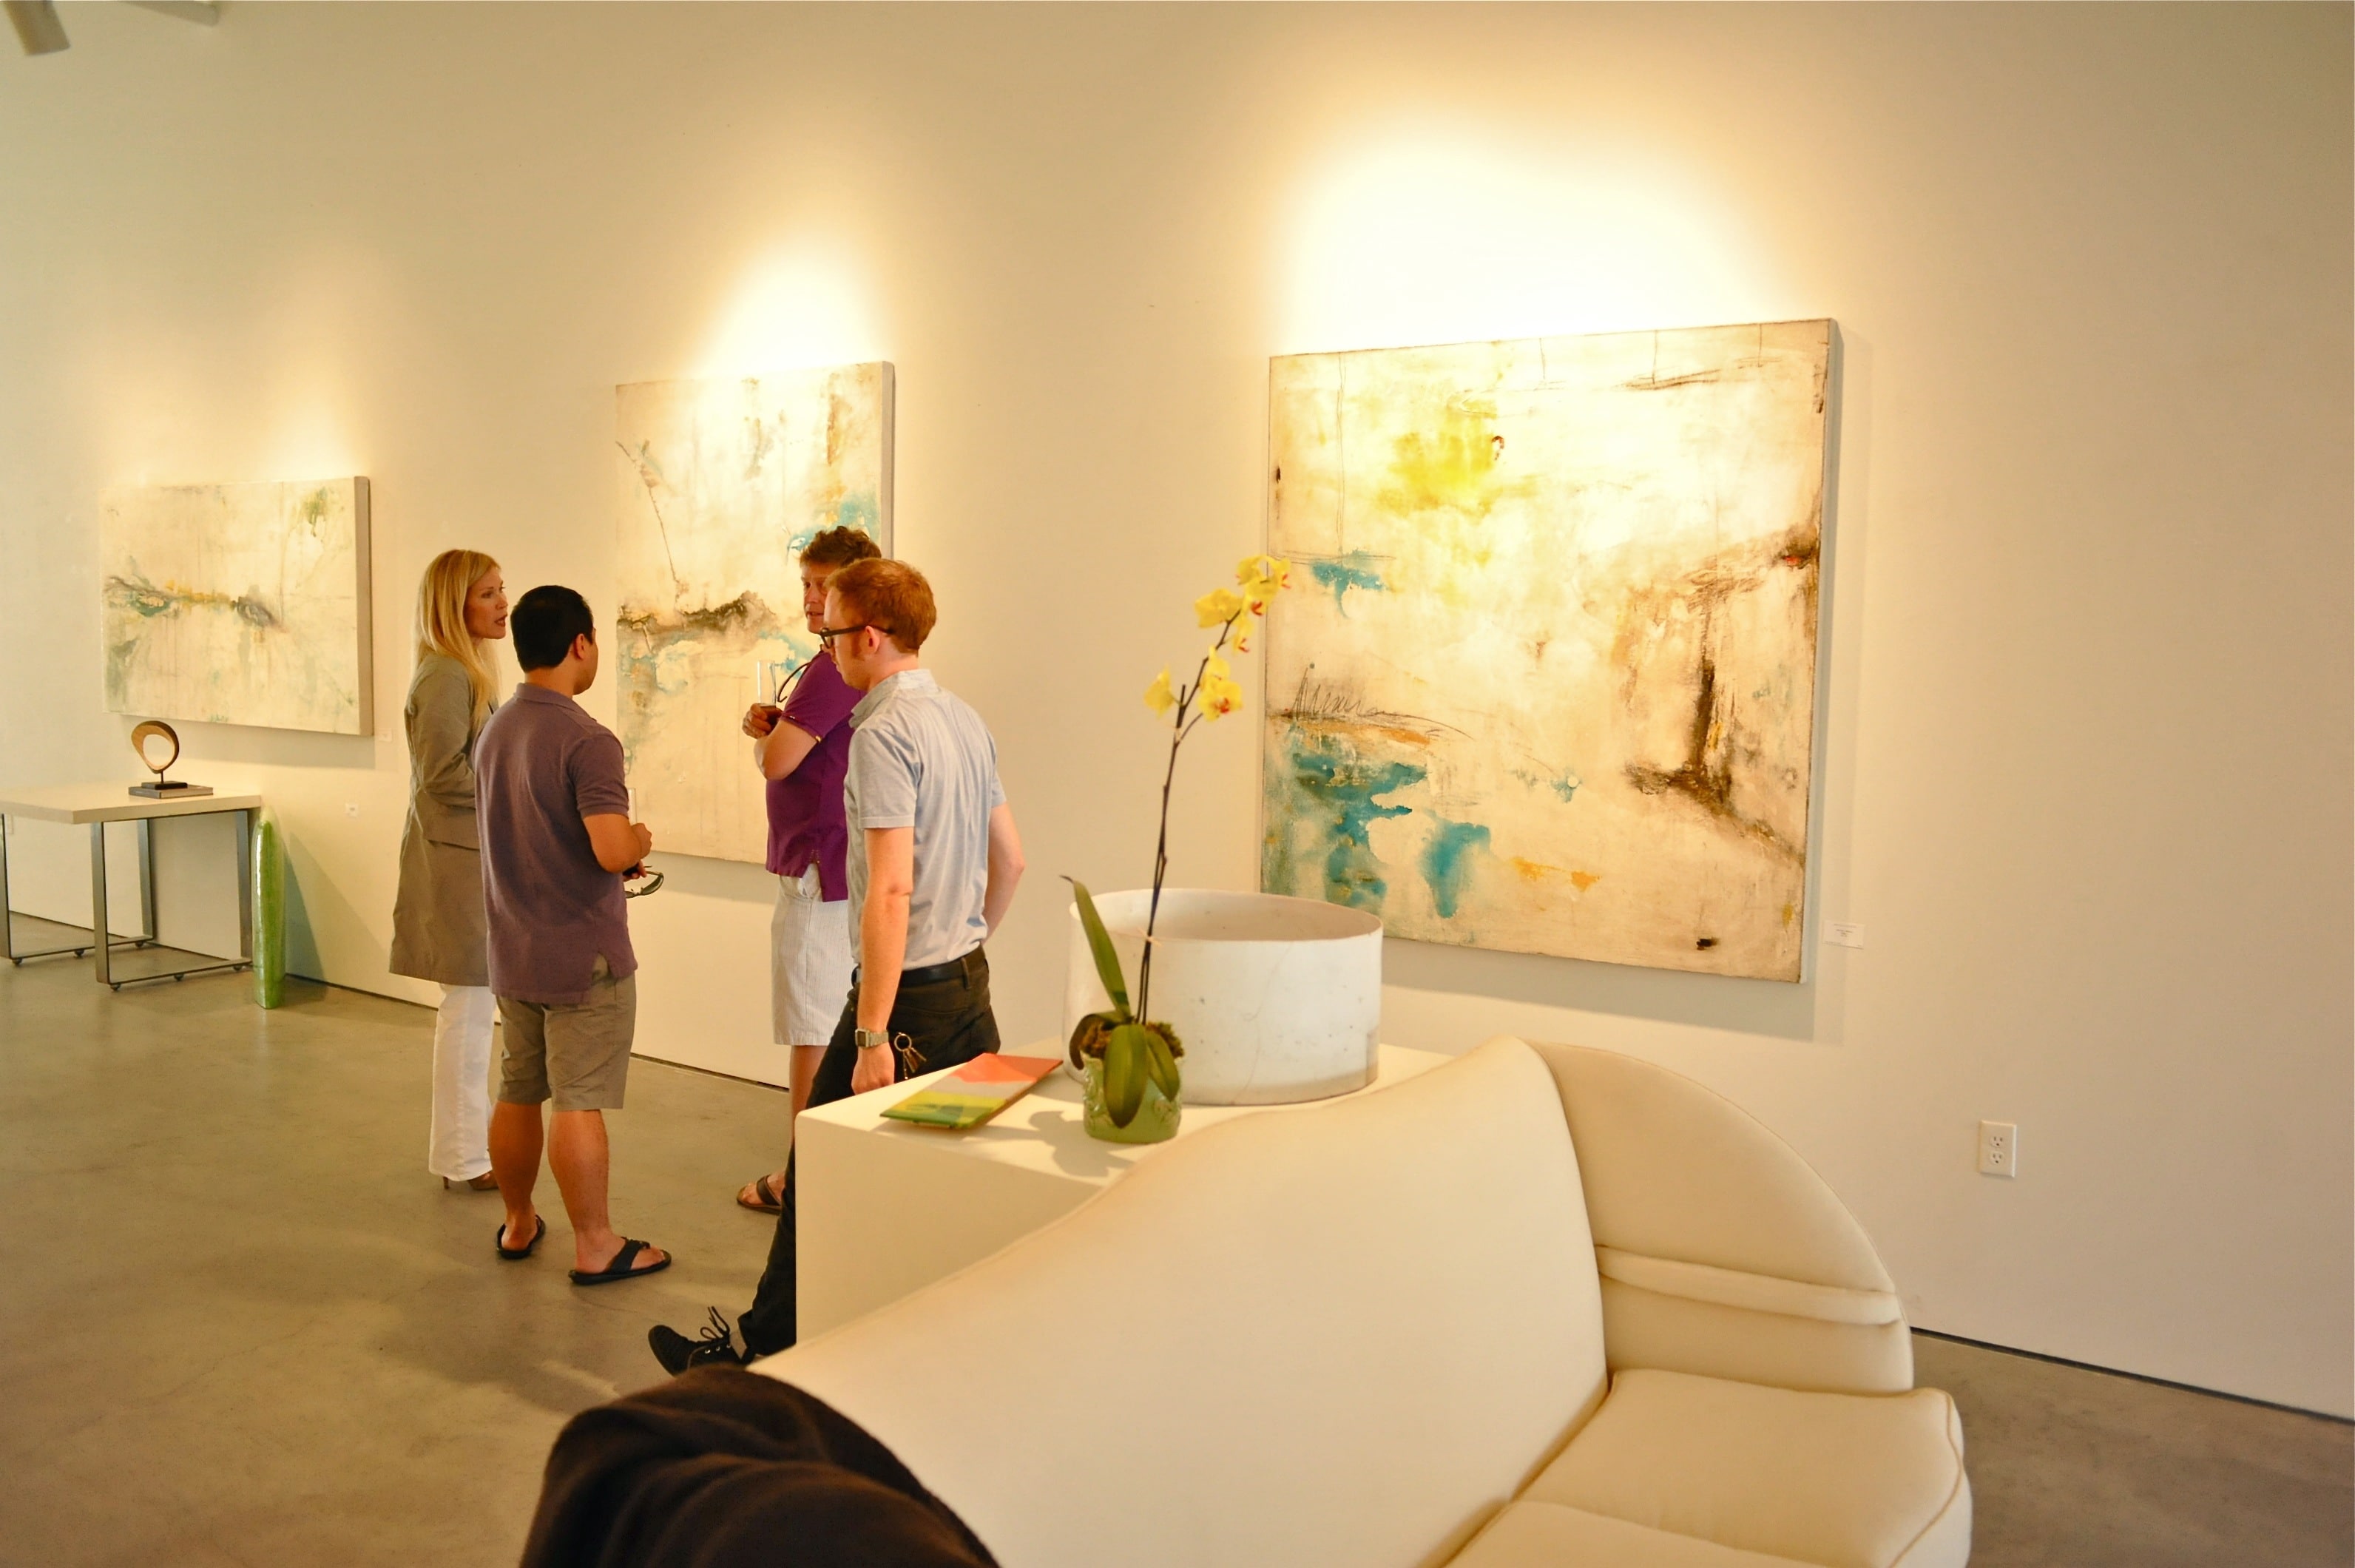 Selling Art, from a Gallerist’s Perspective